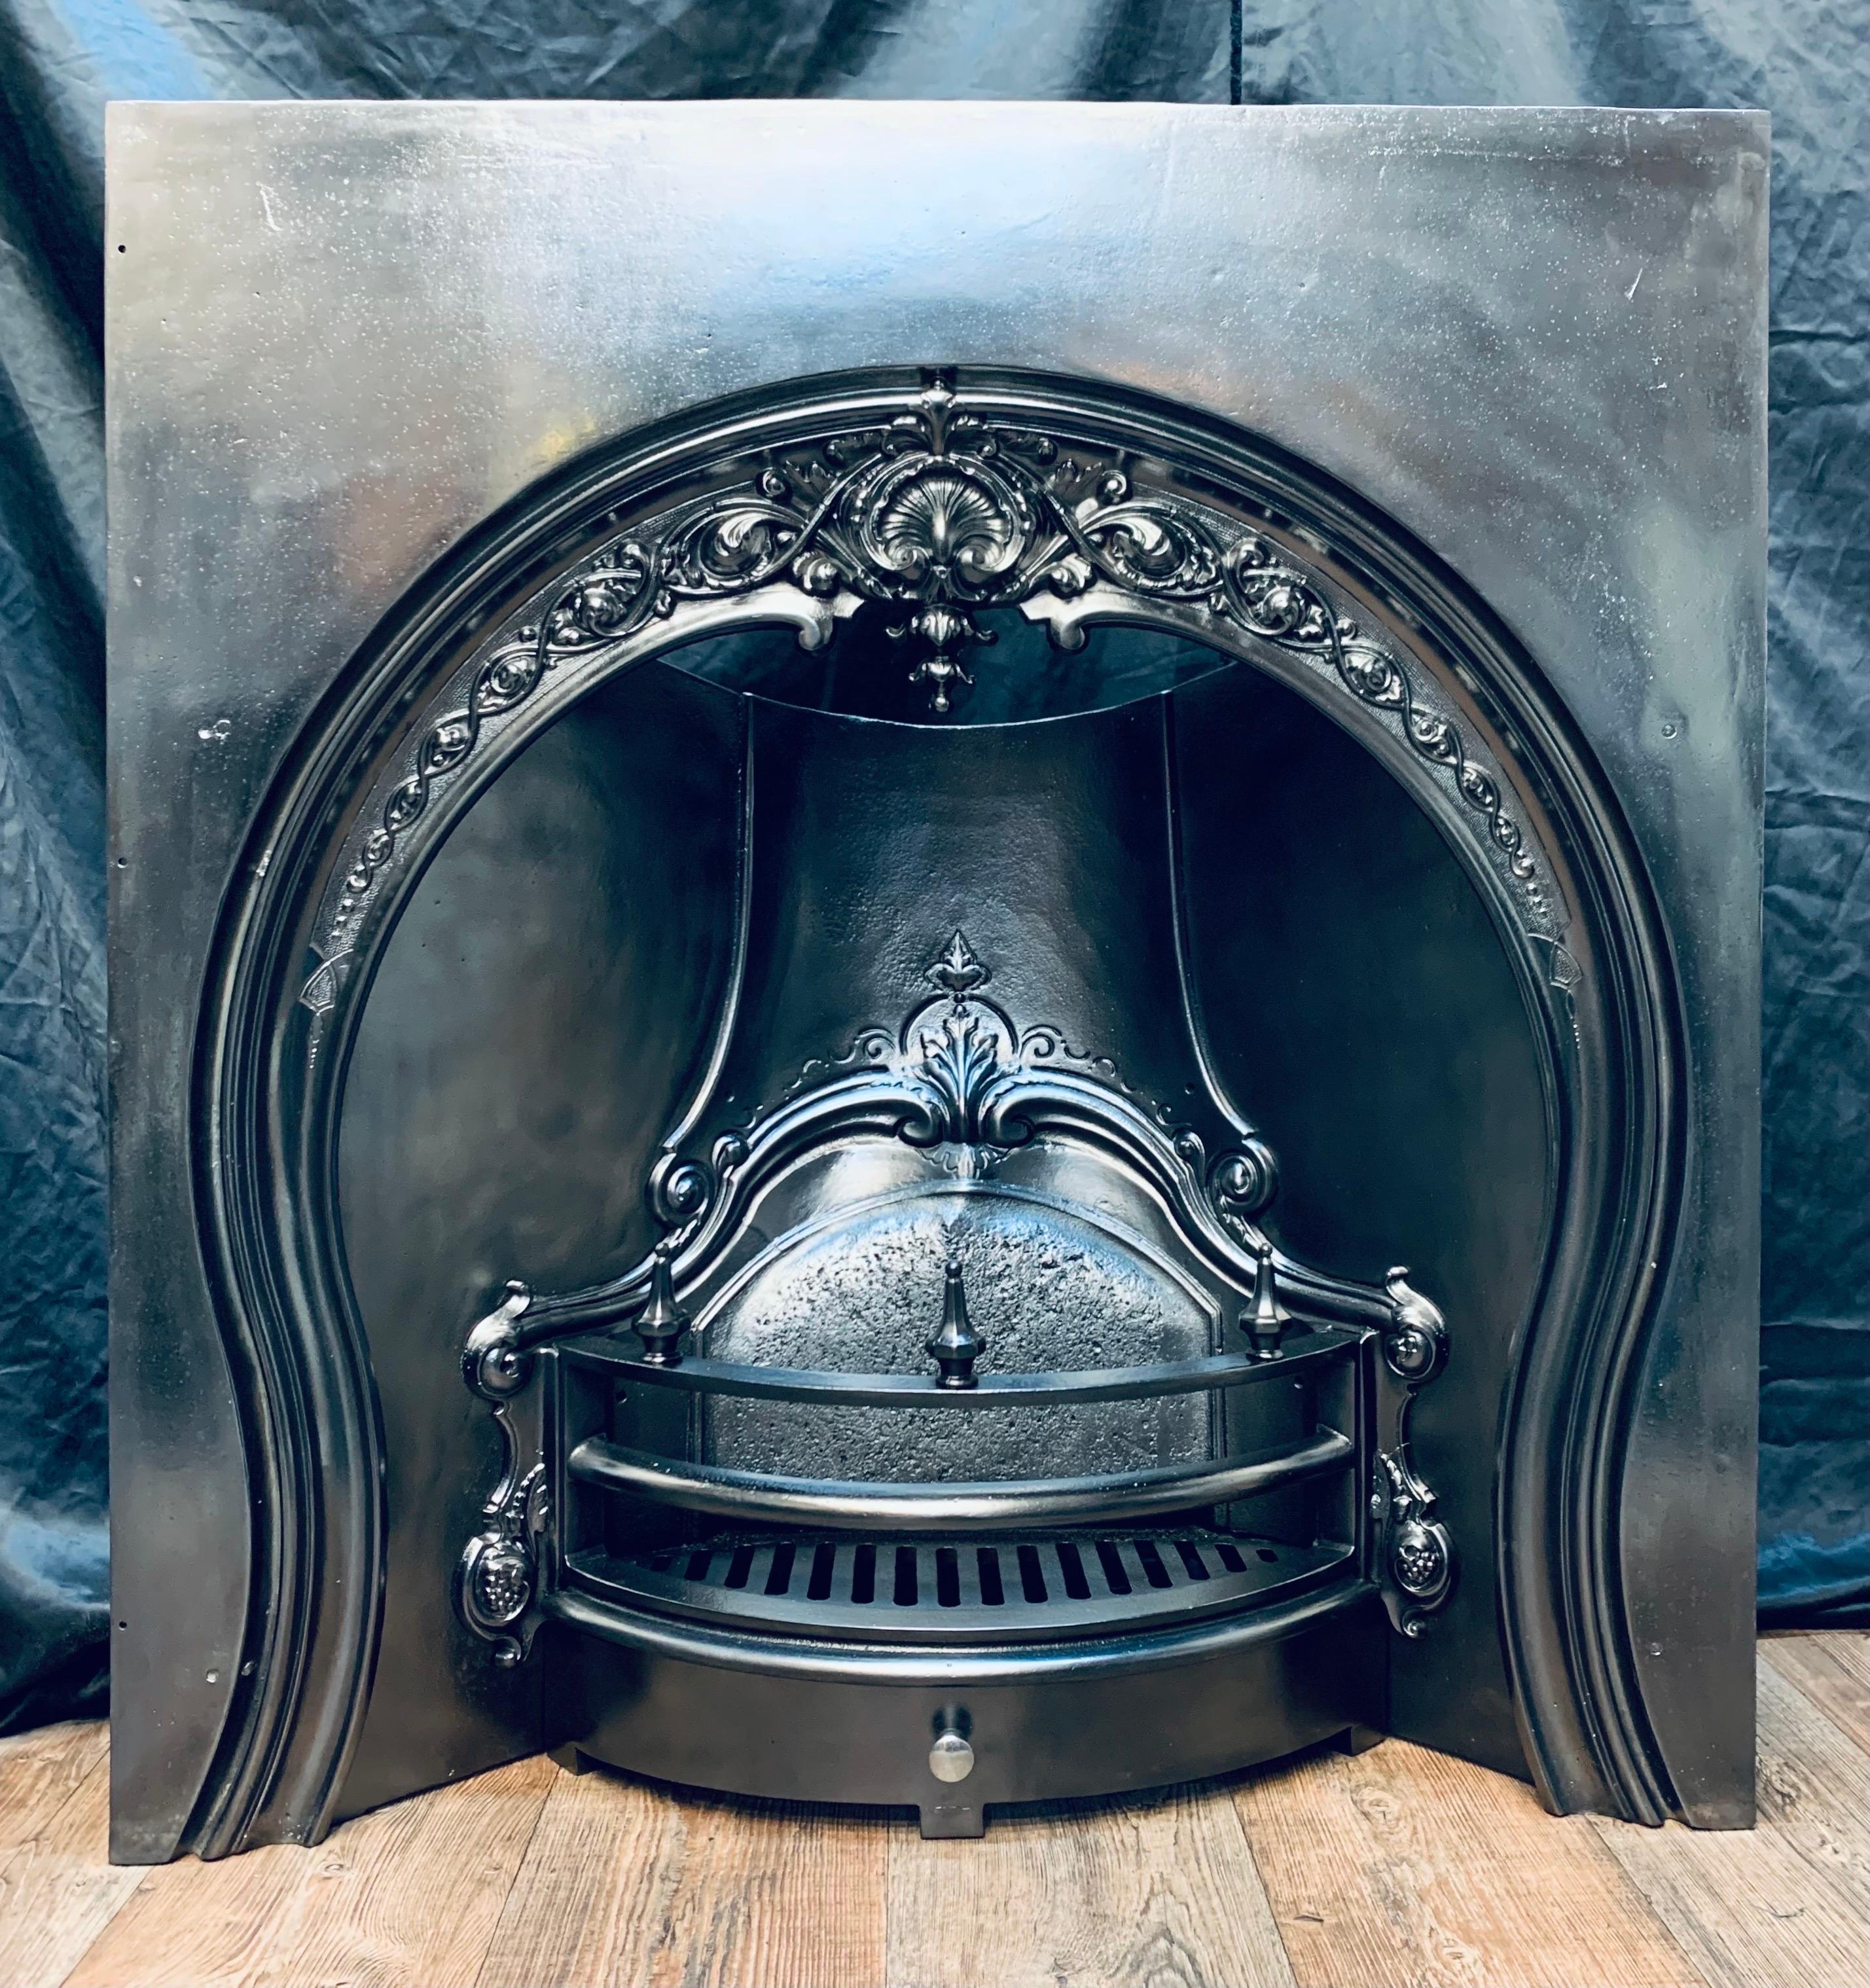 A very pleasing 19th Century Victorian cast iron fireplace insert. A generous outer plate in the form of a horseshoe shape with cast embellishments and an intricate central shell, a funnel chamber back section the three piece curved bars adorned